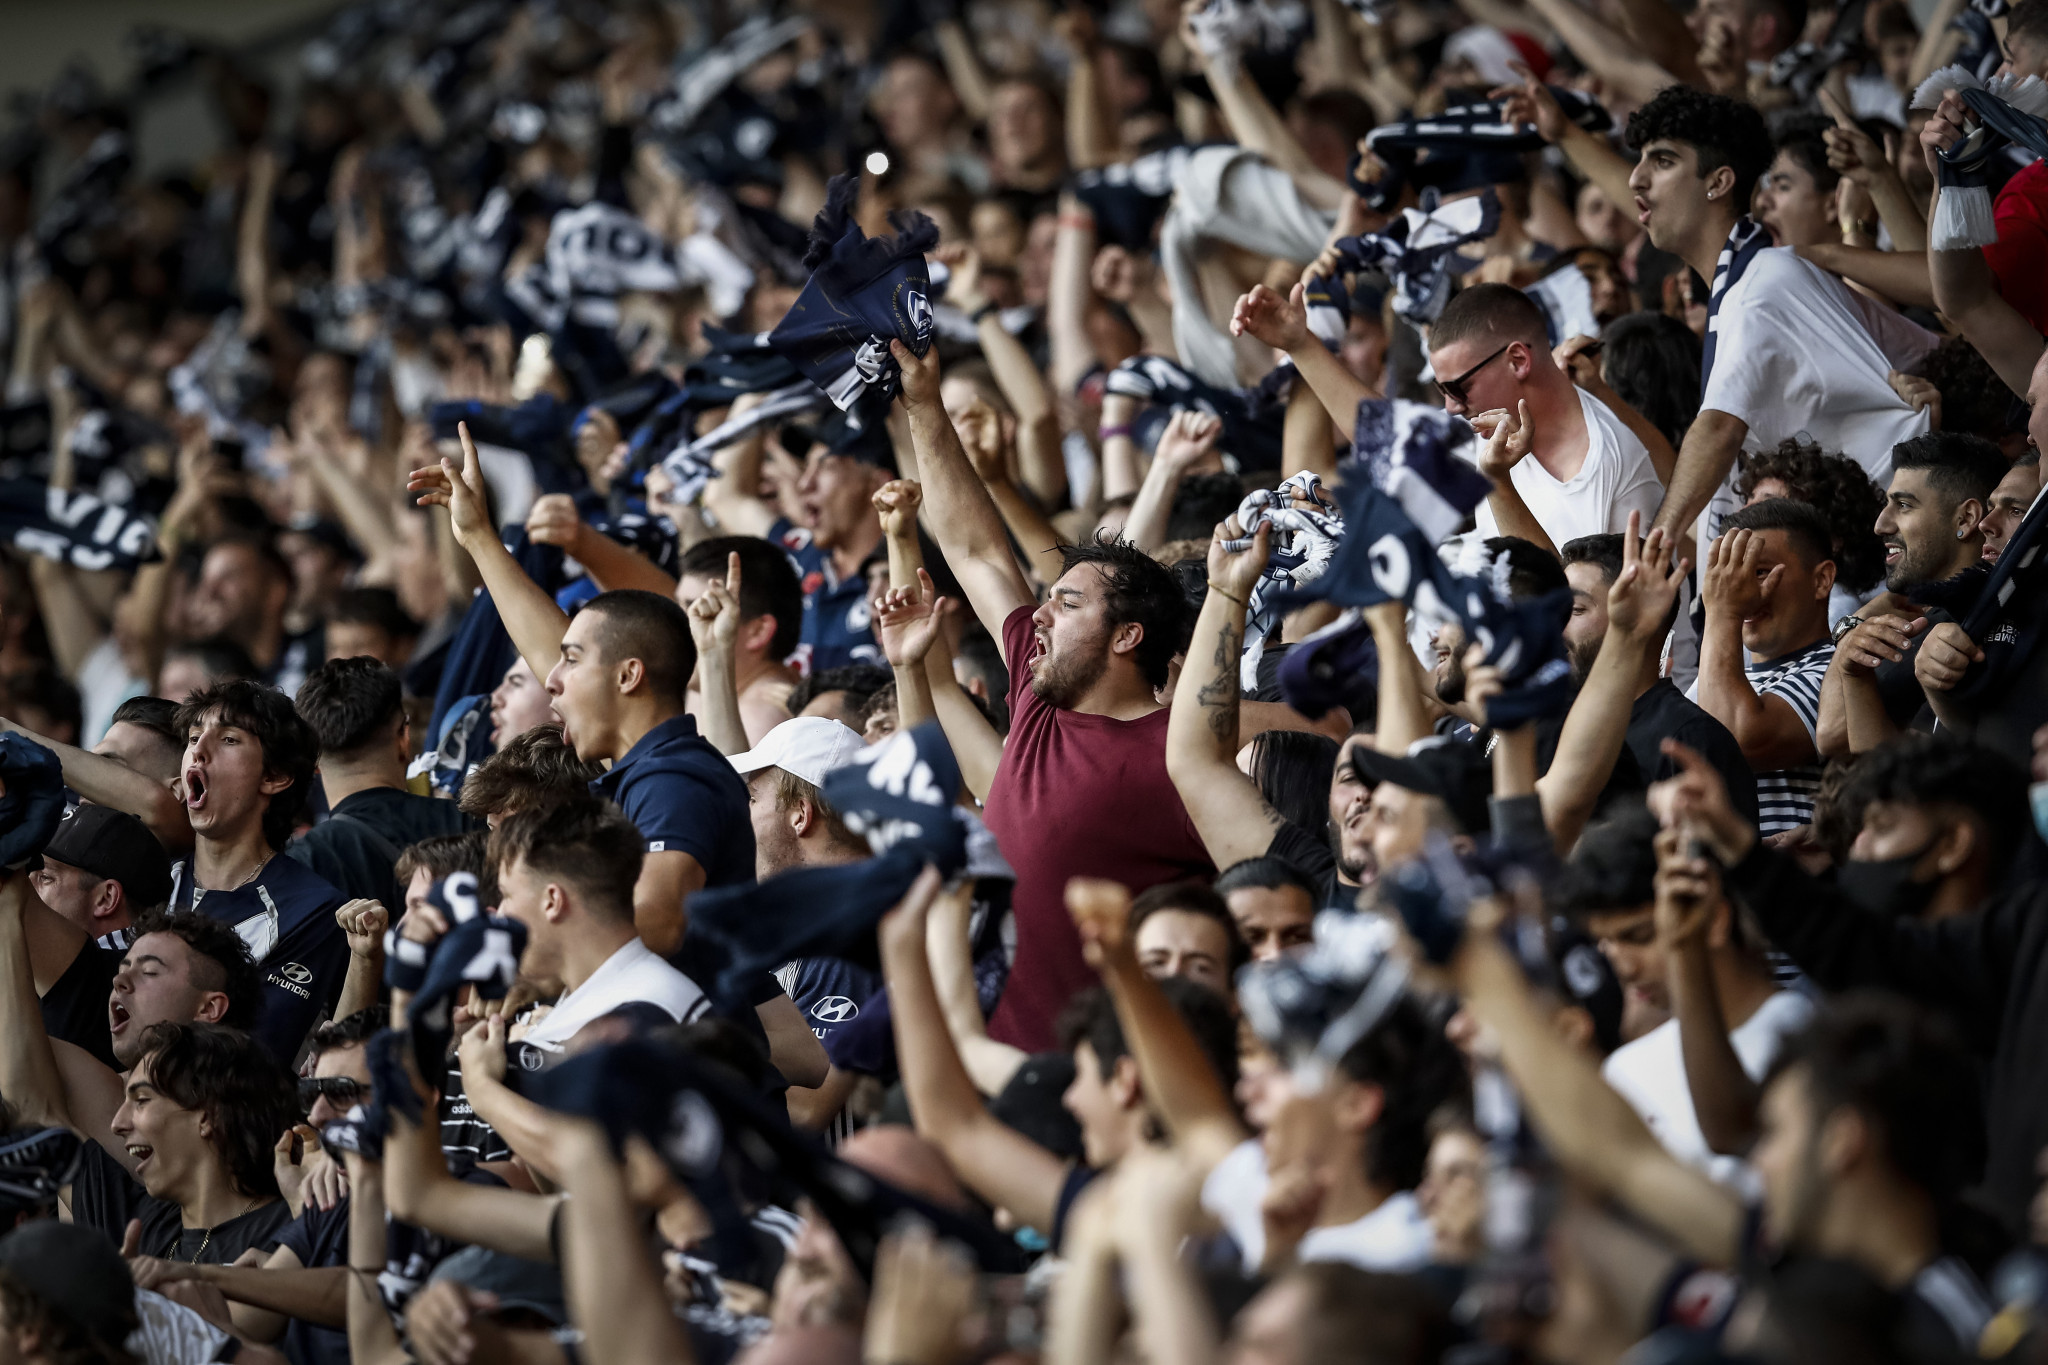 Melbourne Victory given heaviest fine in Australian football after pitch invasion